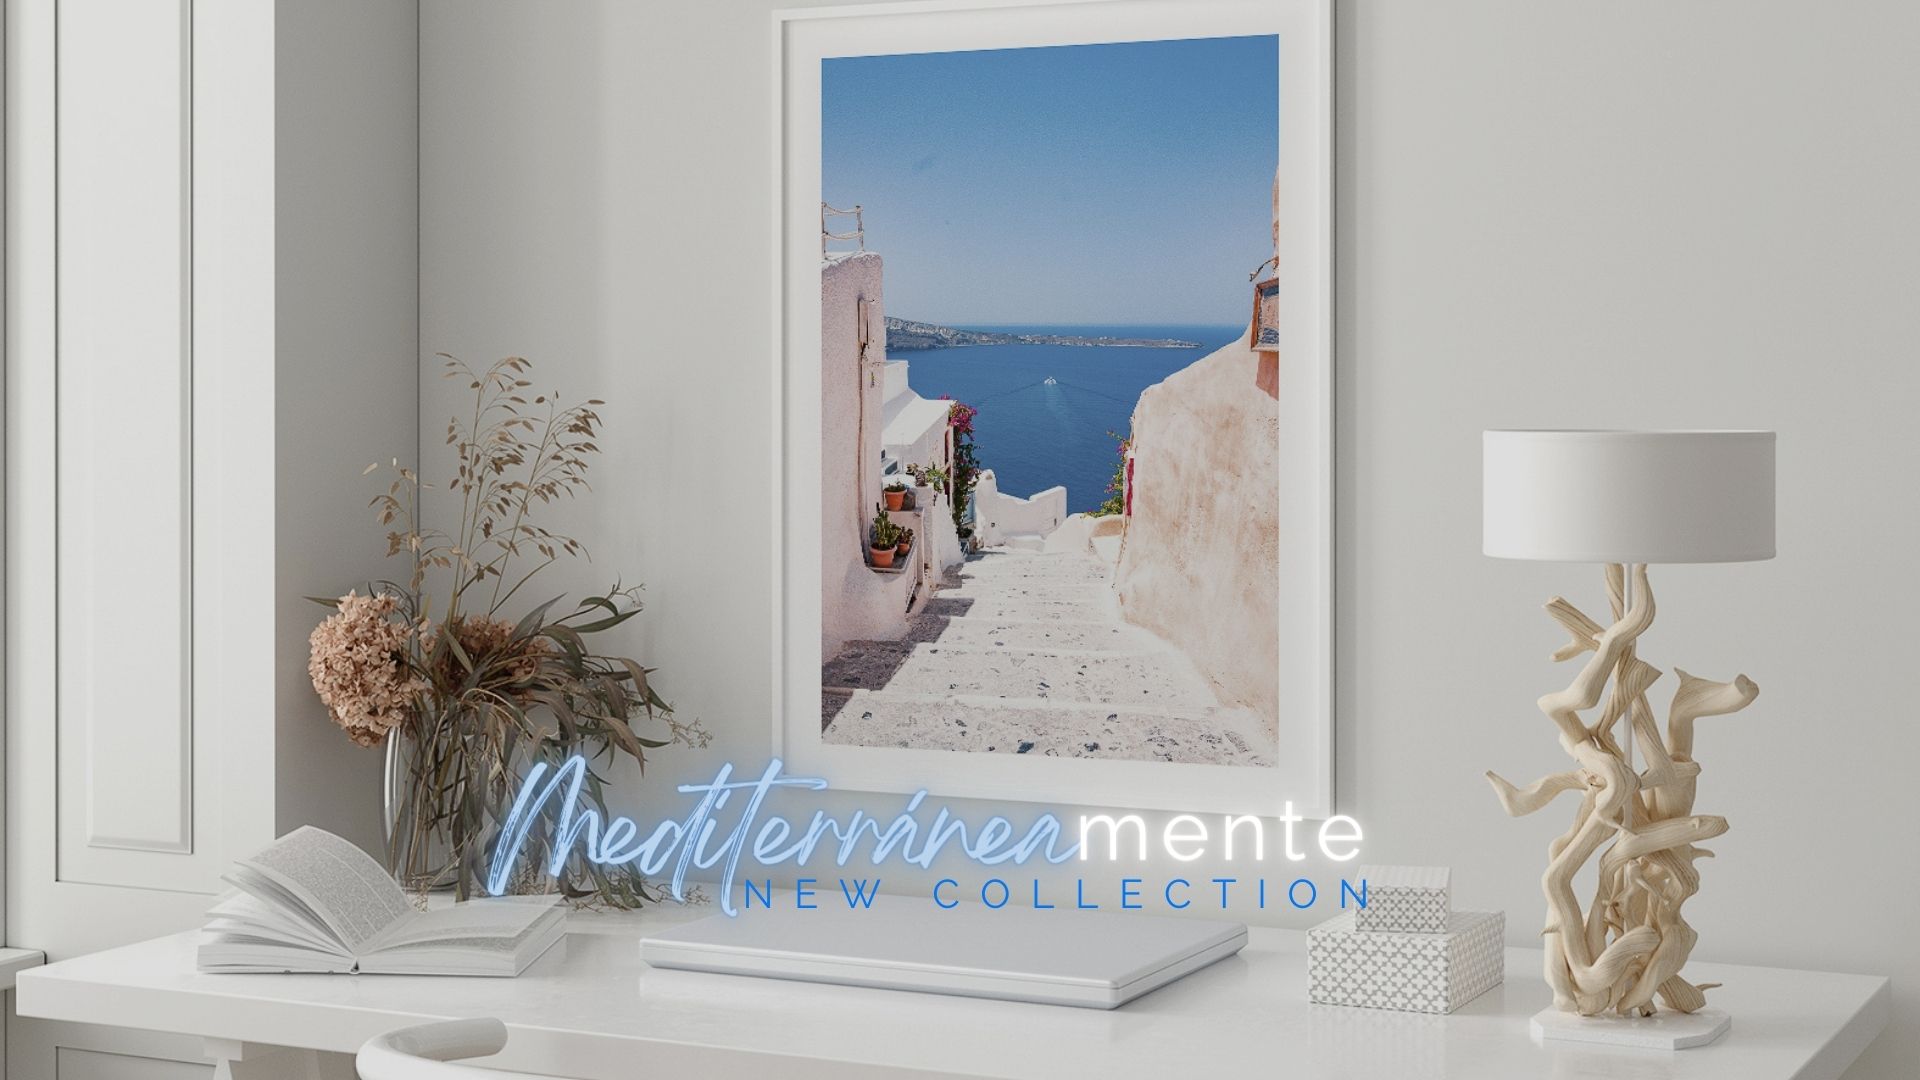 Give a Mediterranean touch to the decoration of your home